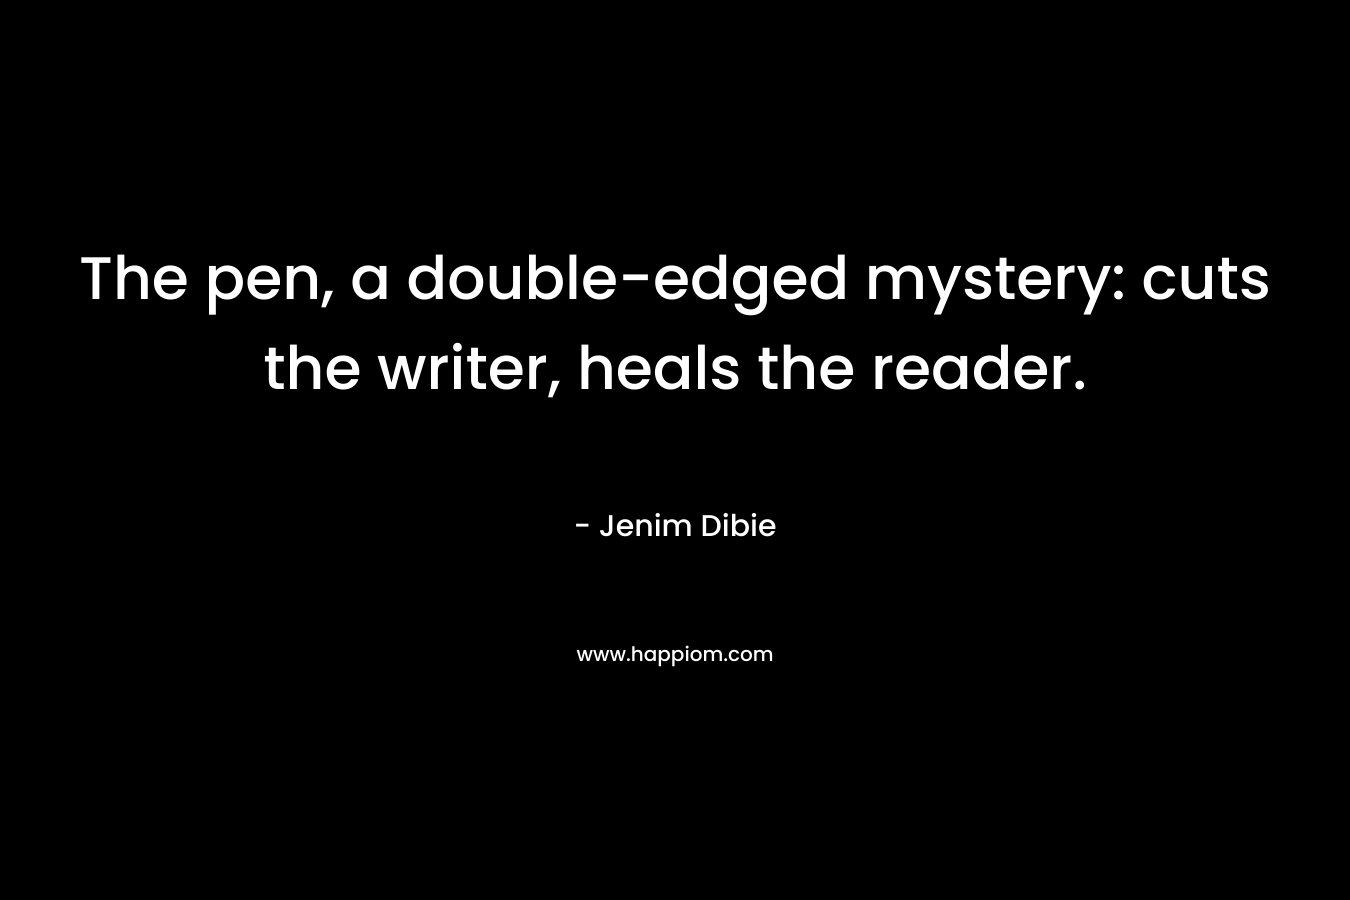 The pen, a double-edged mystery: cuts the writer, heals the reader.